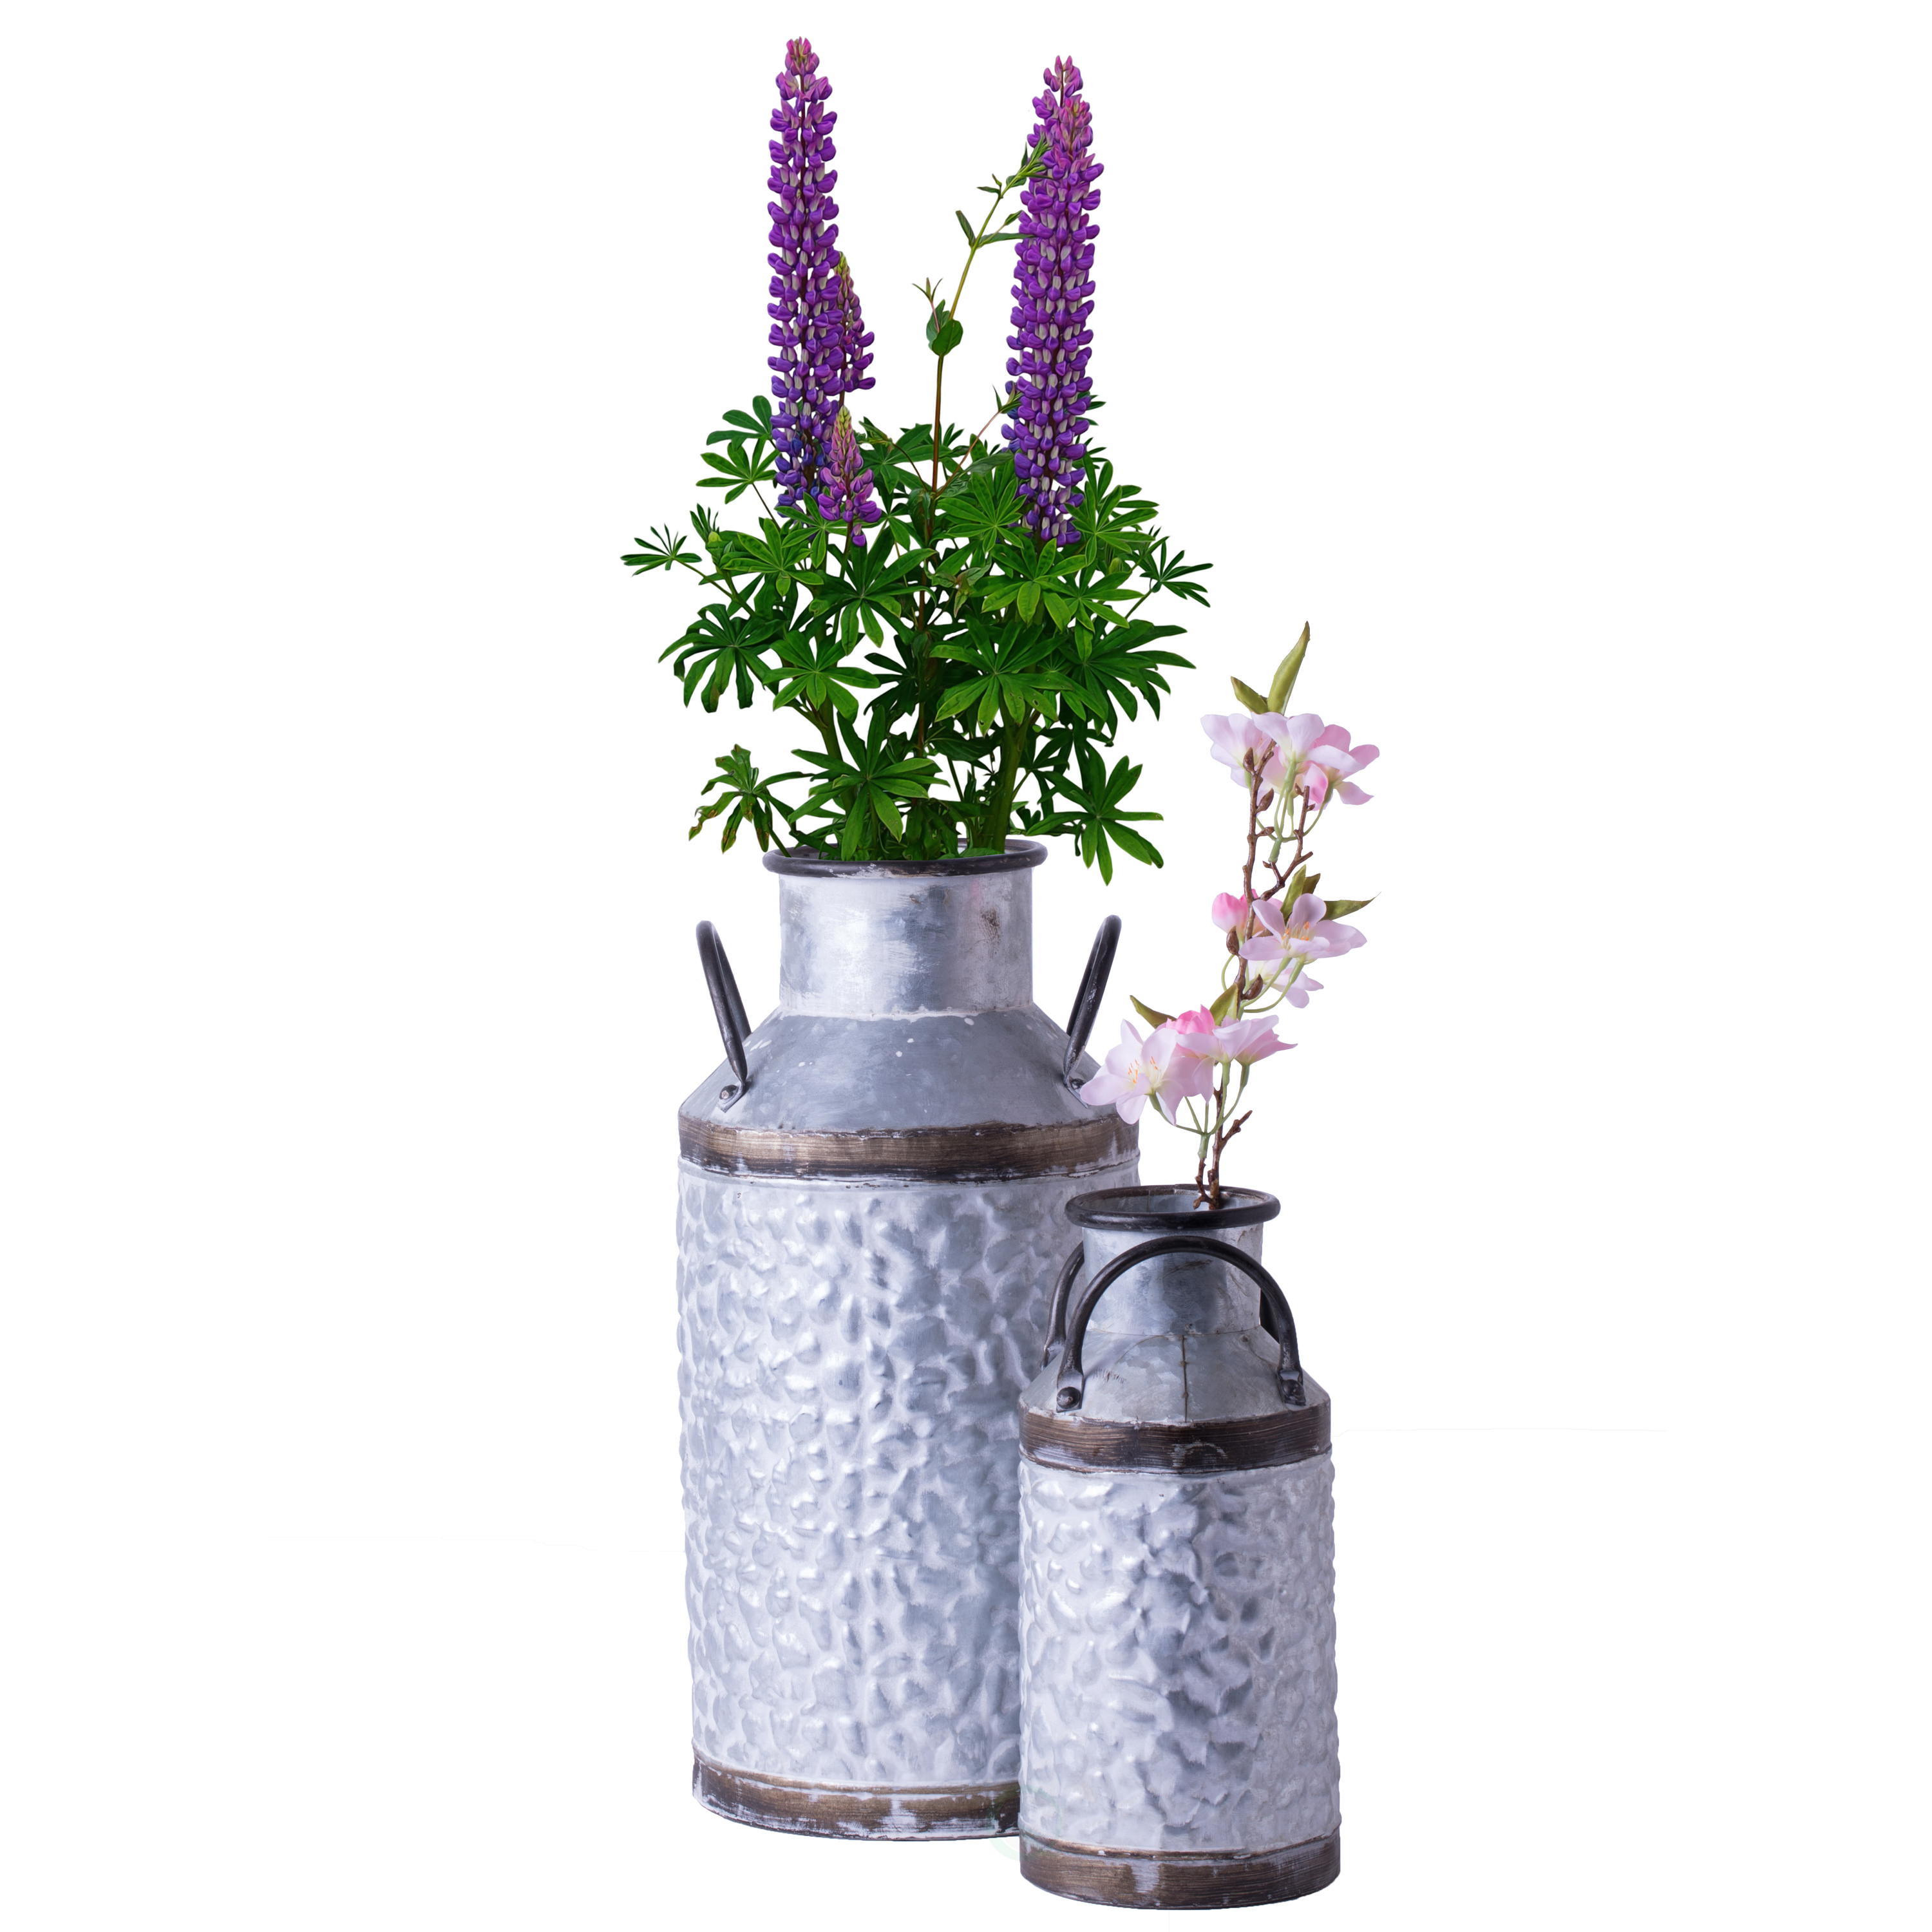 Rustic Farmhouse Style Galvanized Metal Milk Can Decoration Planter And Vase, - Small